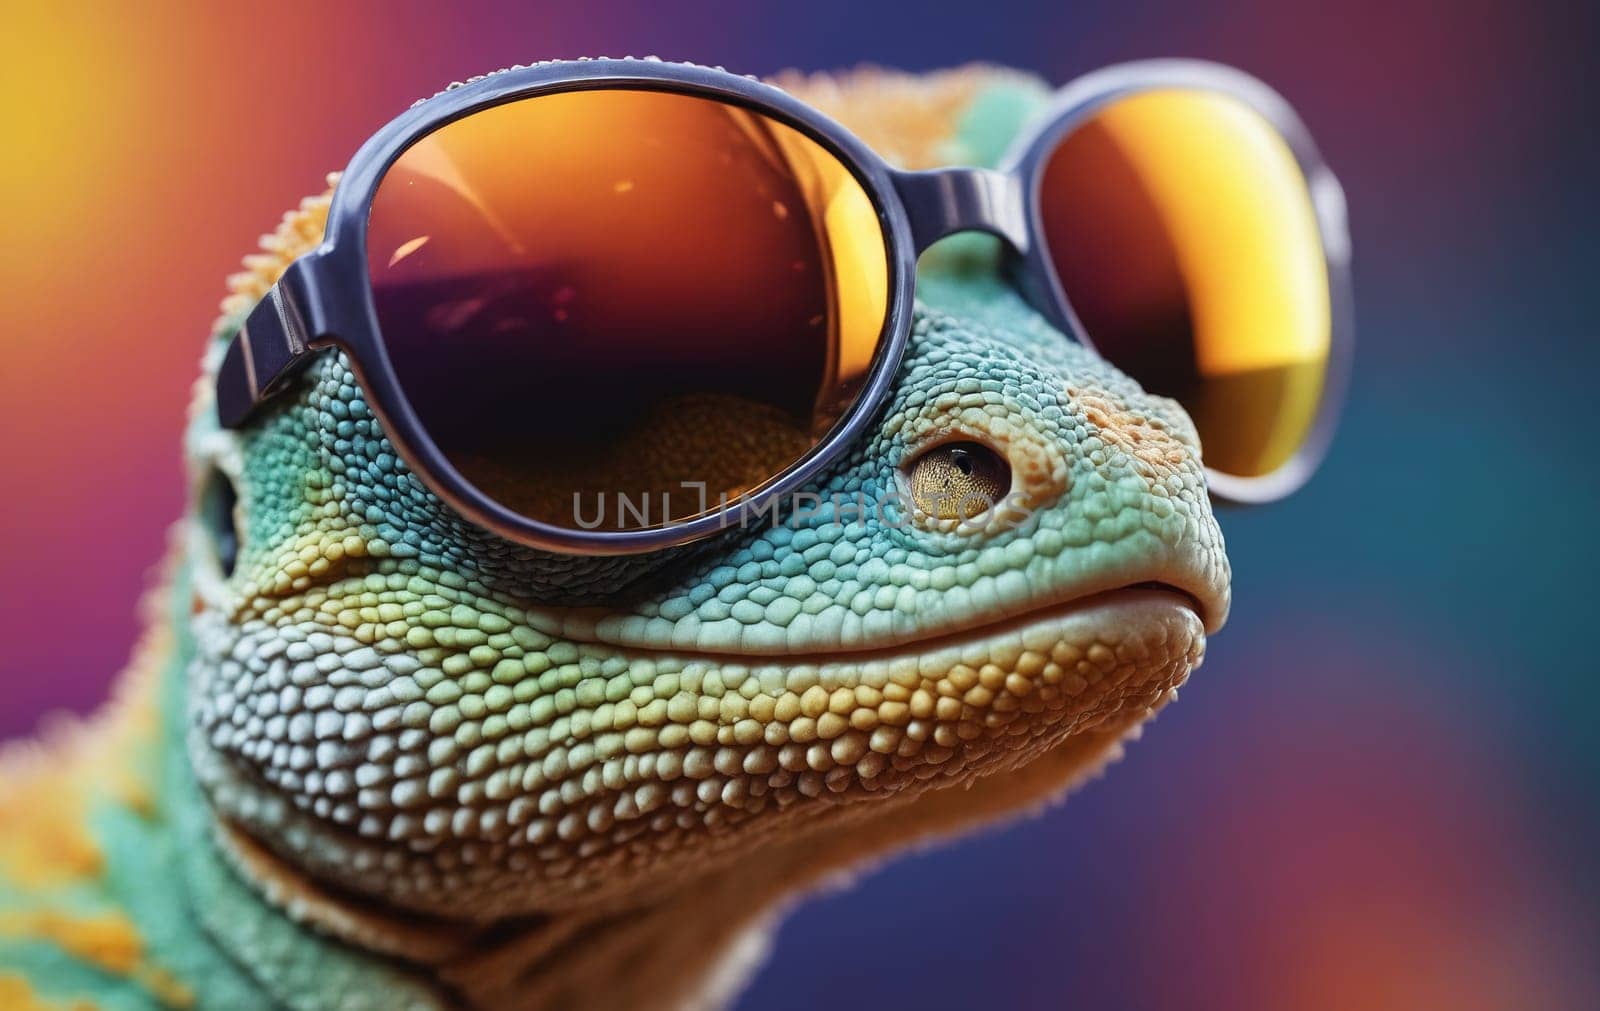 Close up of a colorful chameleon wearing sunglasses on colorful background.